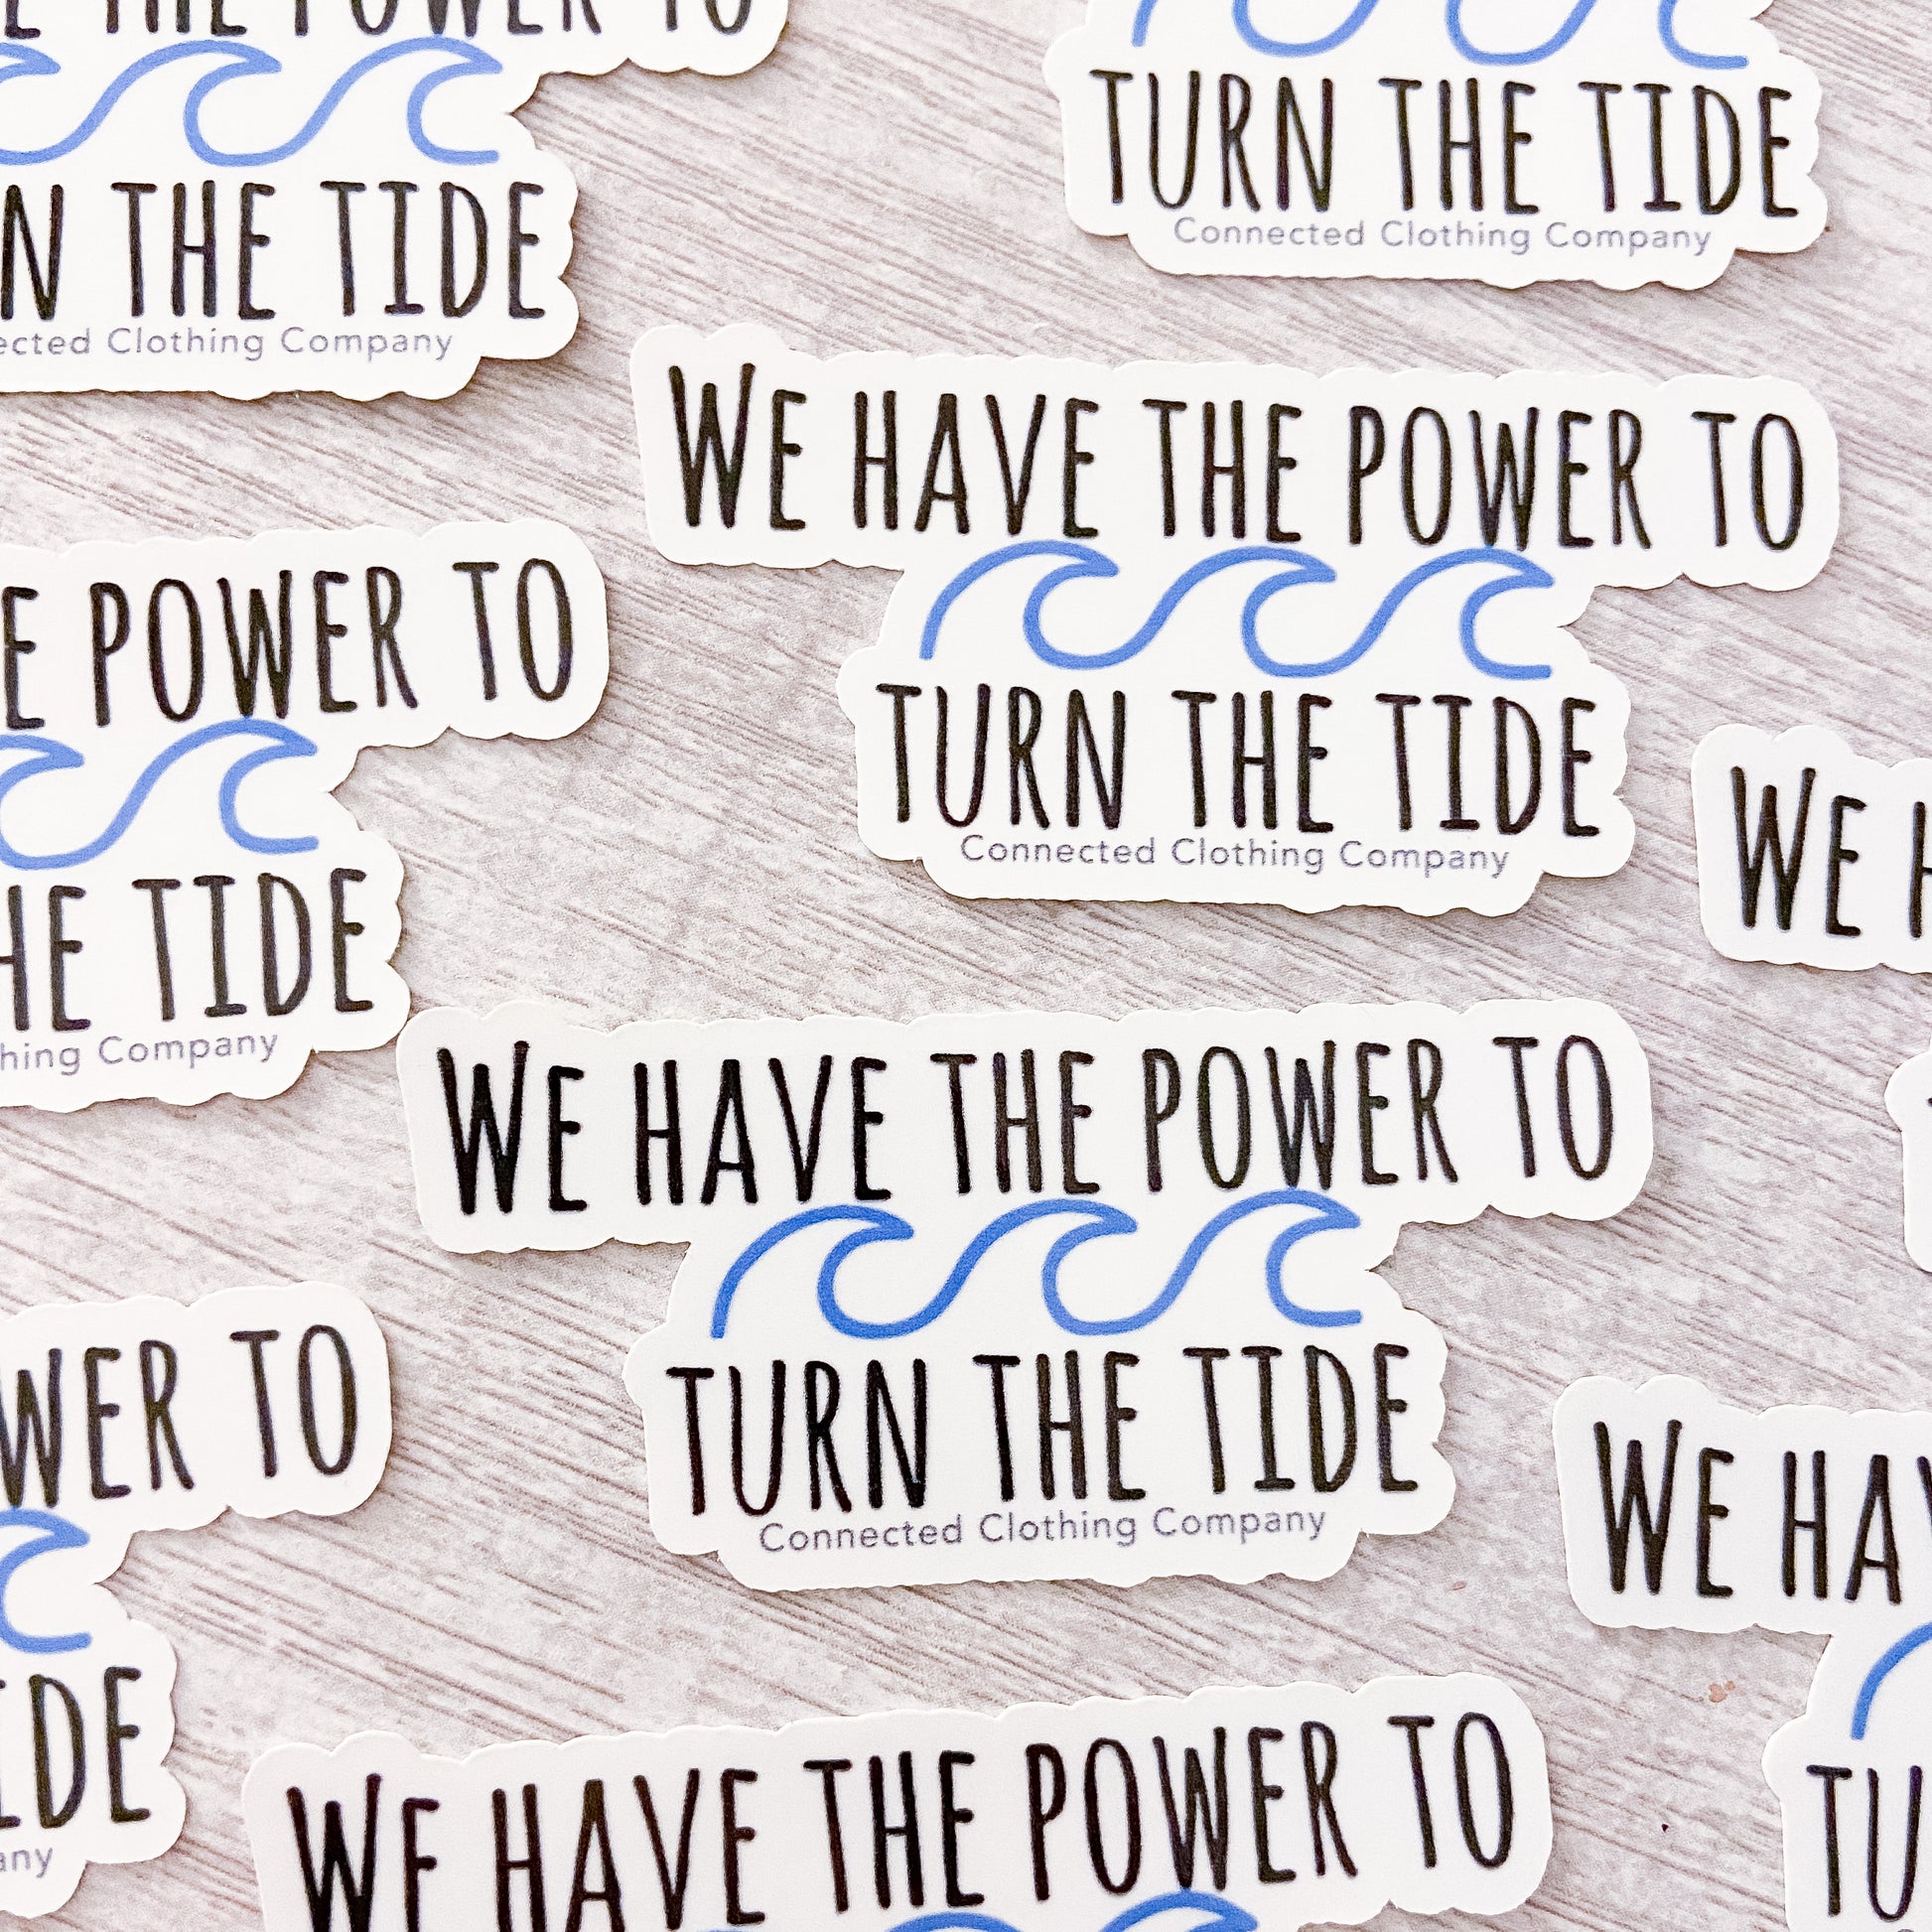 Turn The Tide Sticker - Connected Clothing Company - 10% donated to Mission Blue ocean conservation